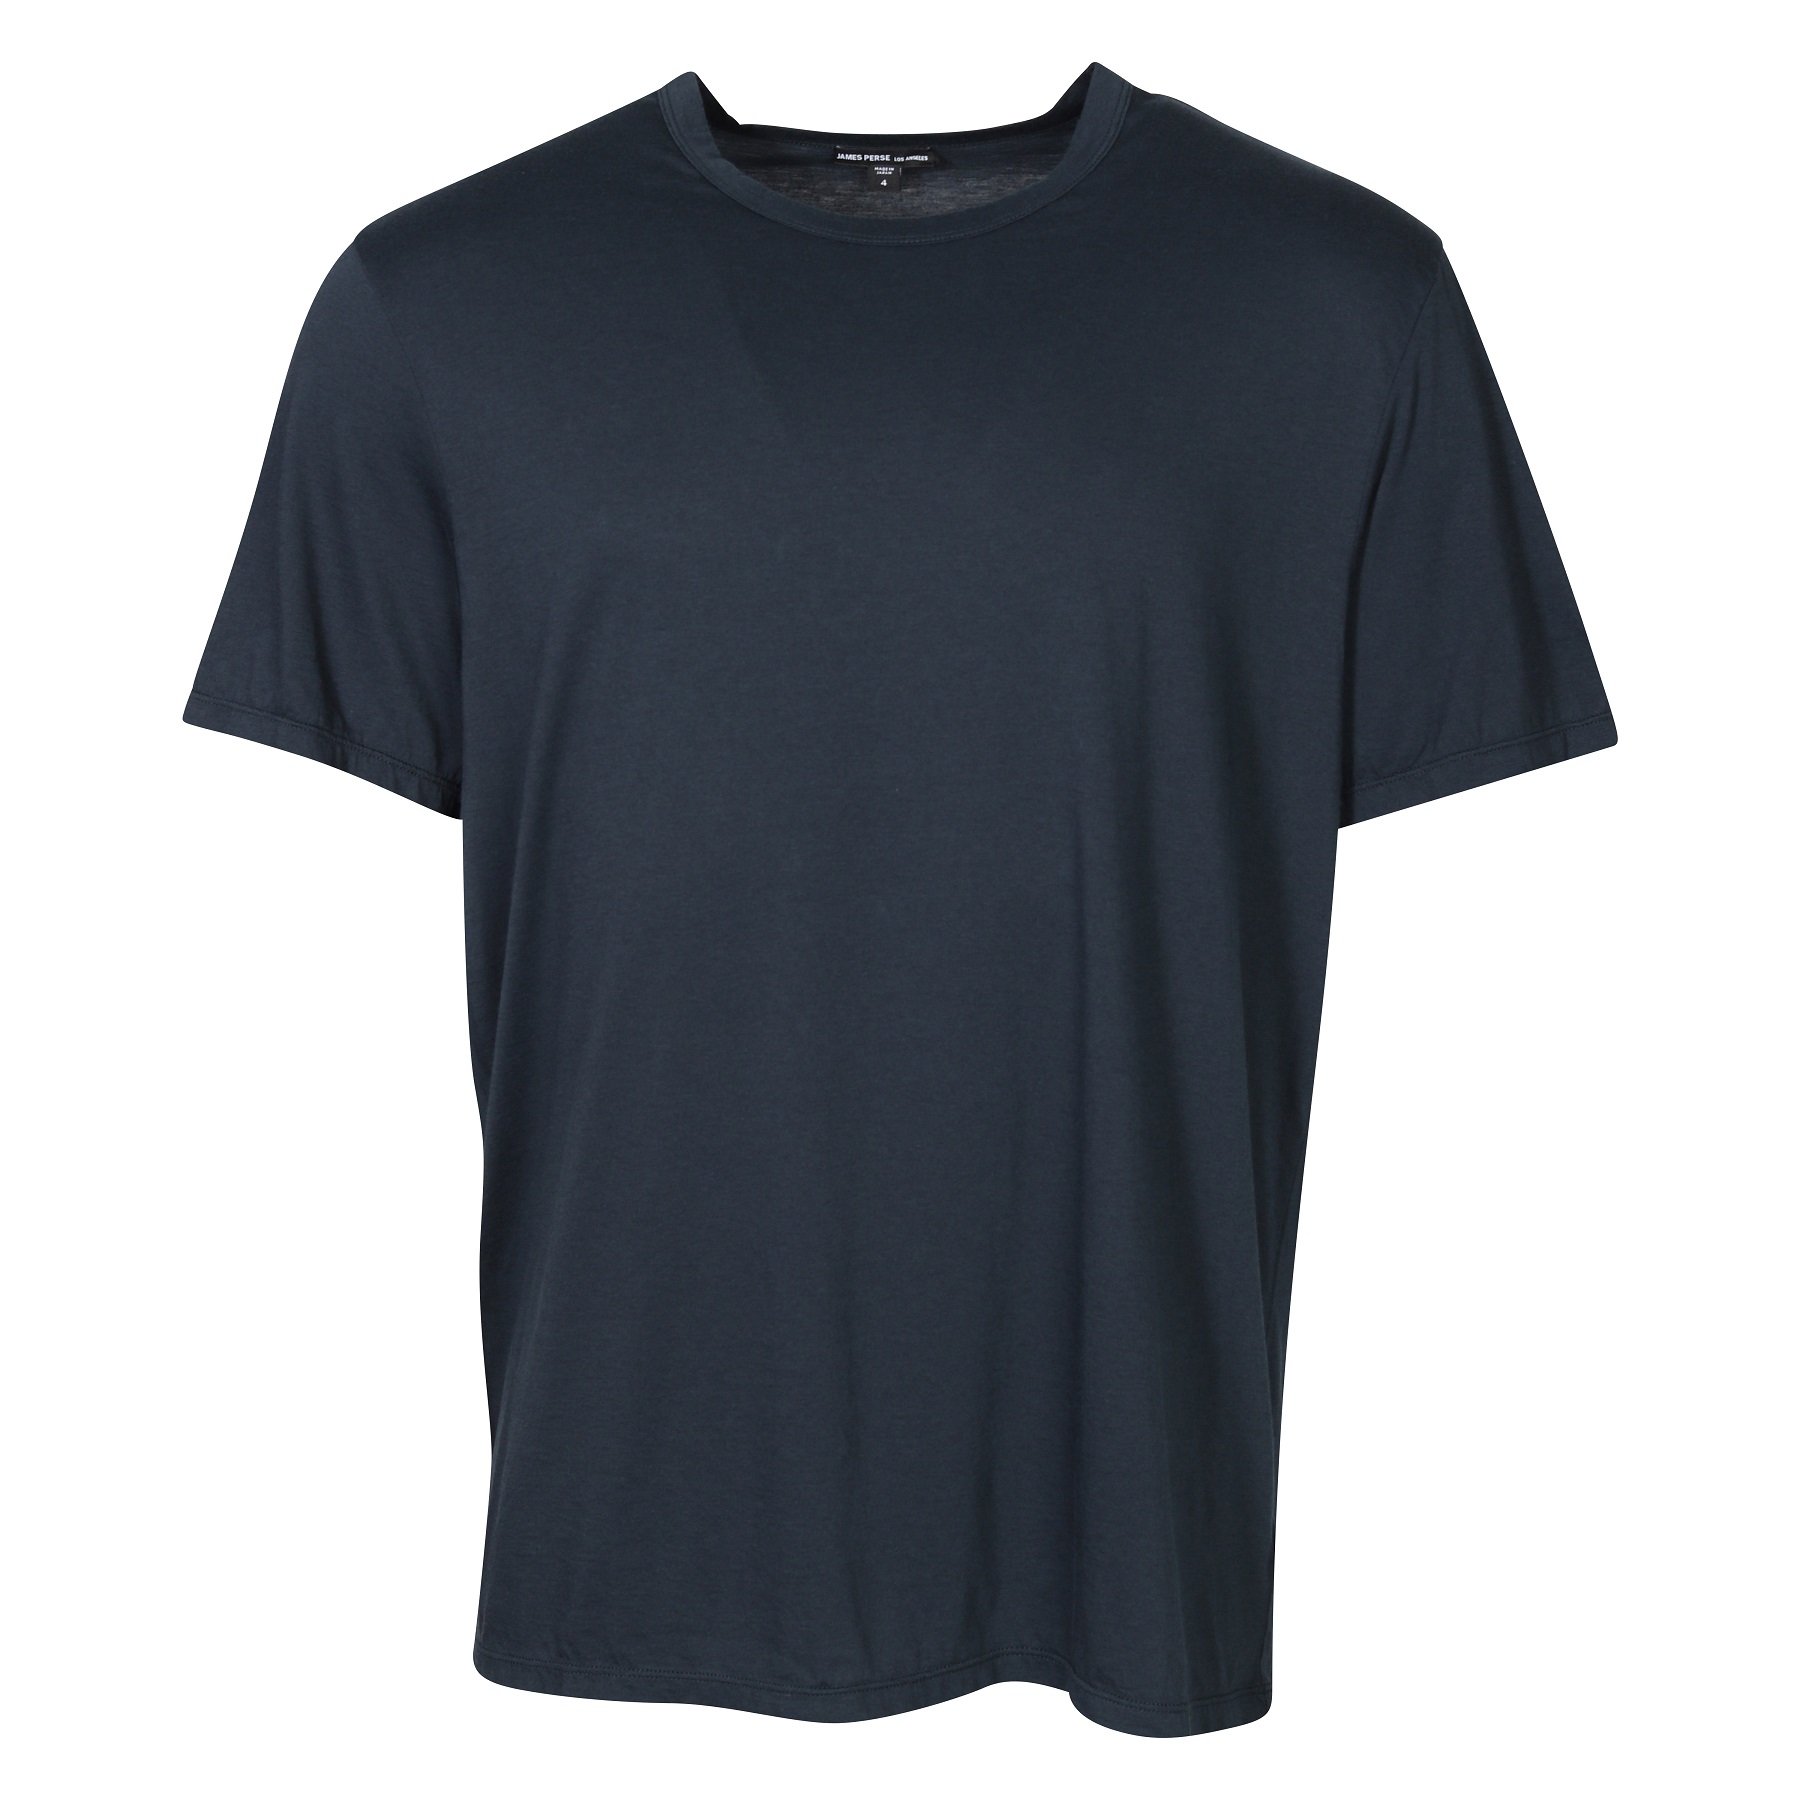 James Perse Elevated Lotus Jersey T-Shirt in French Navy